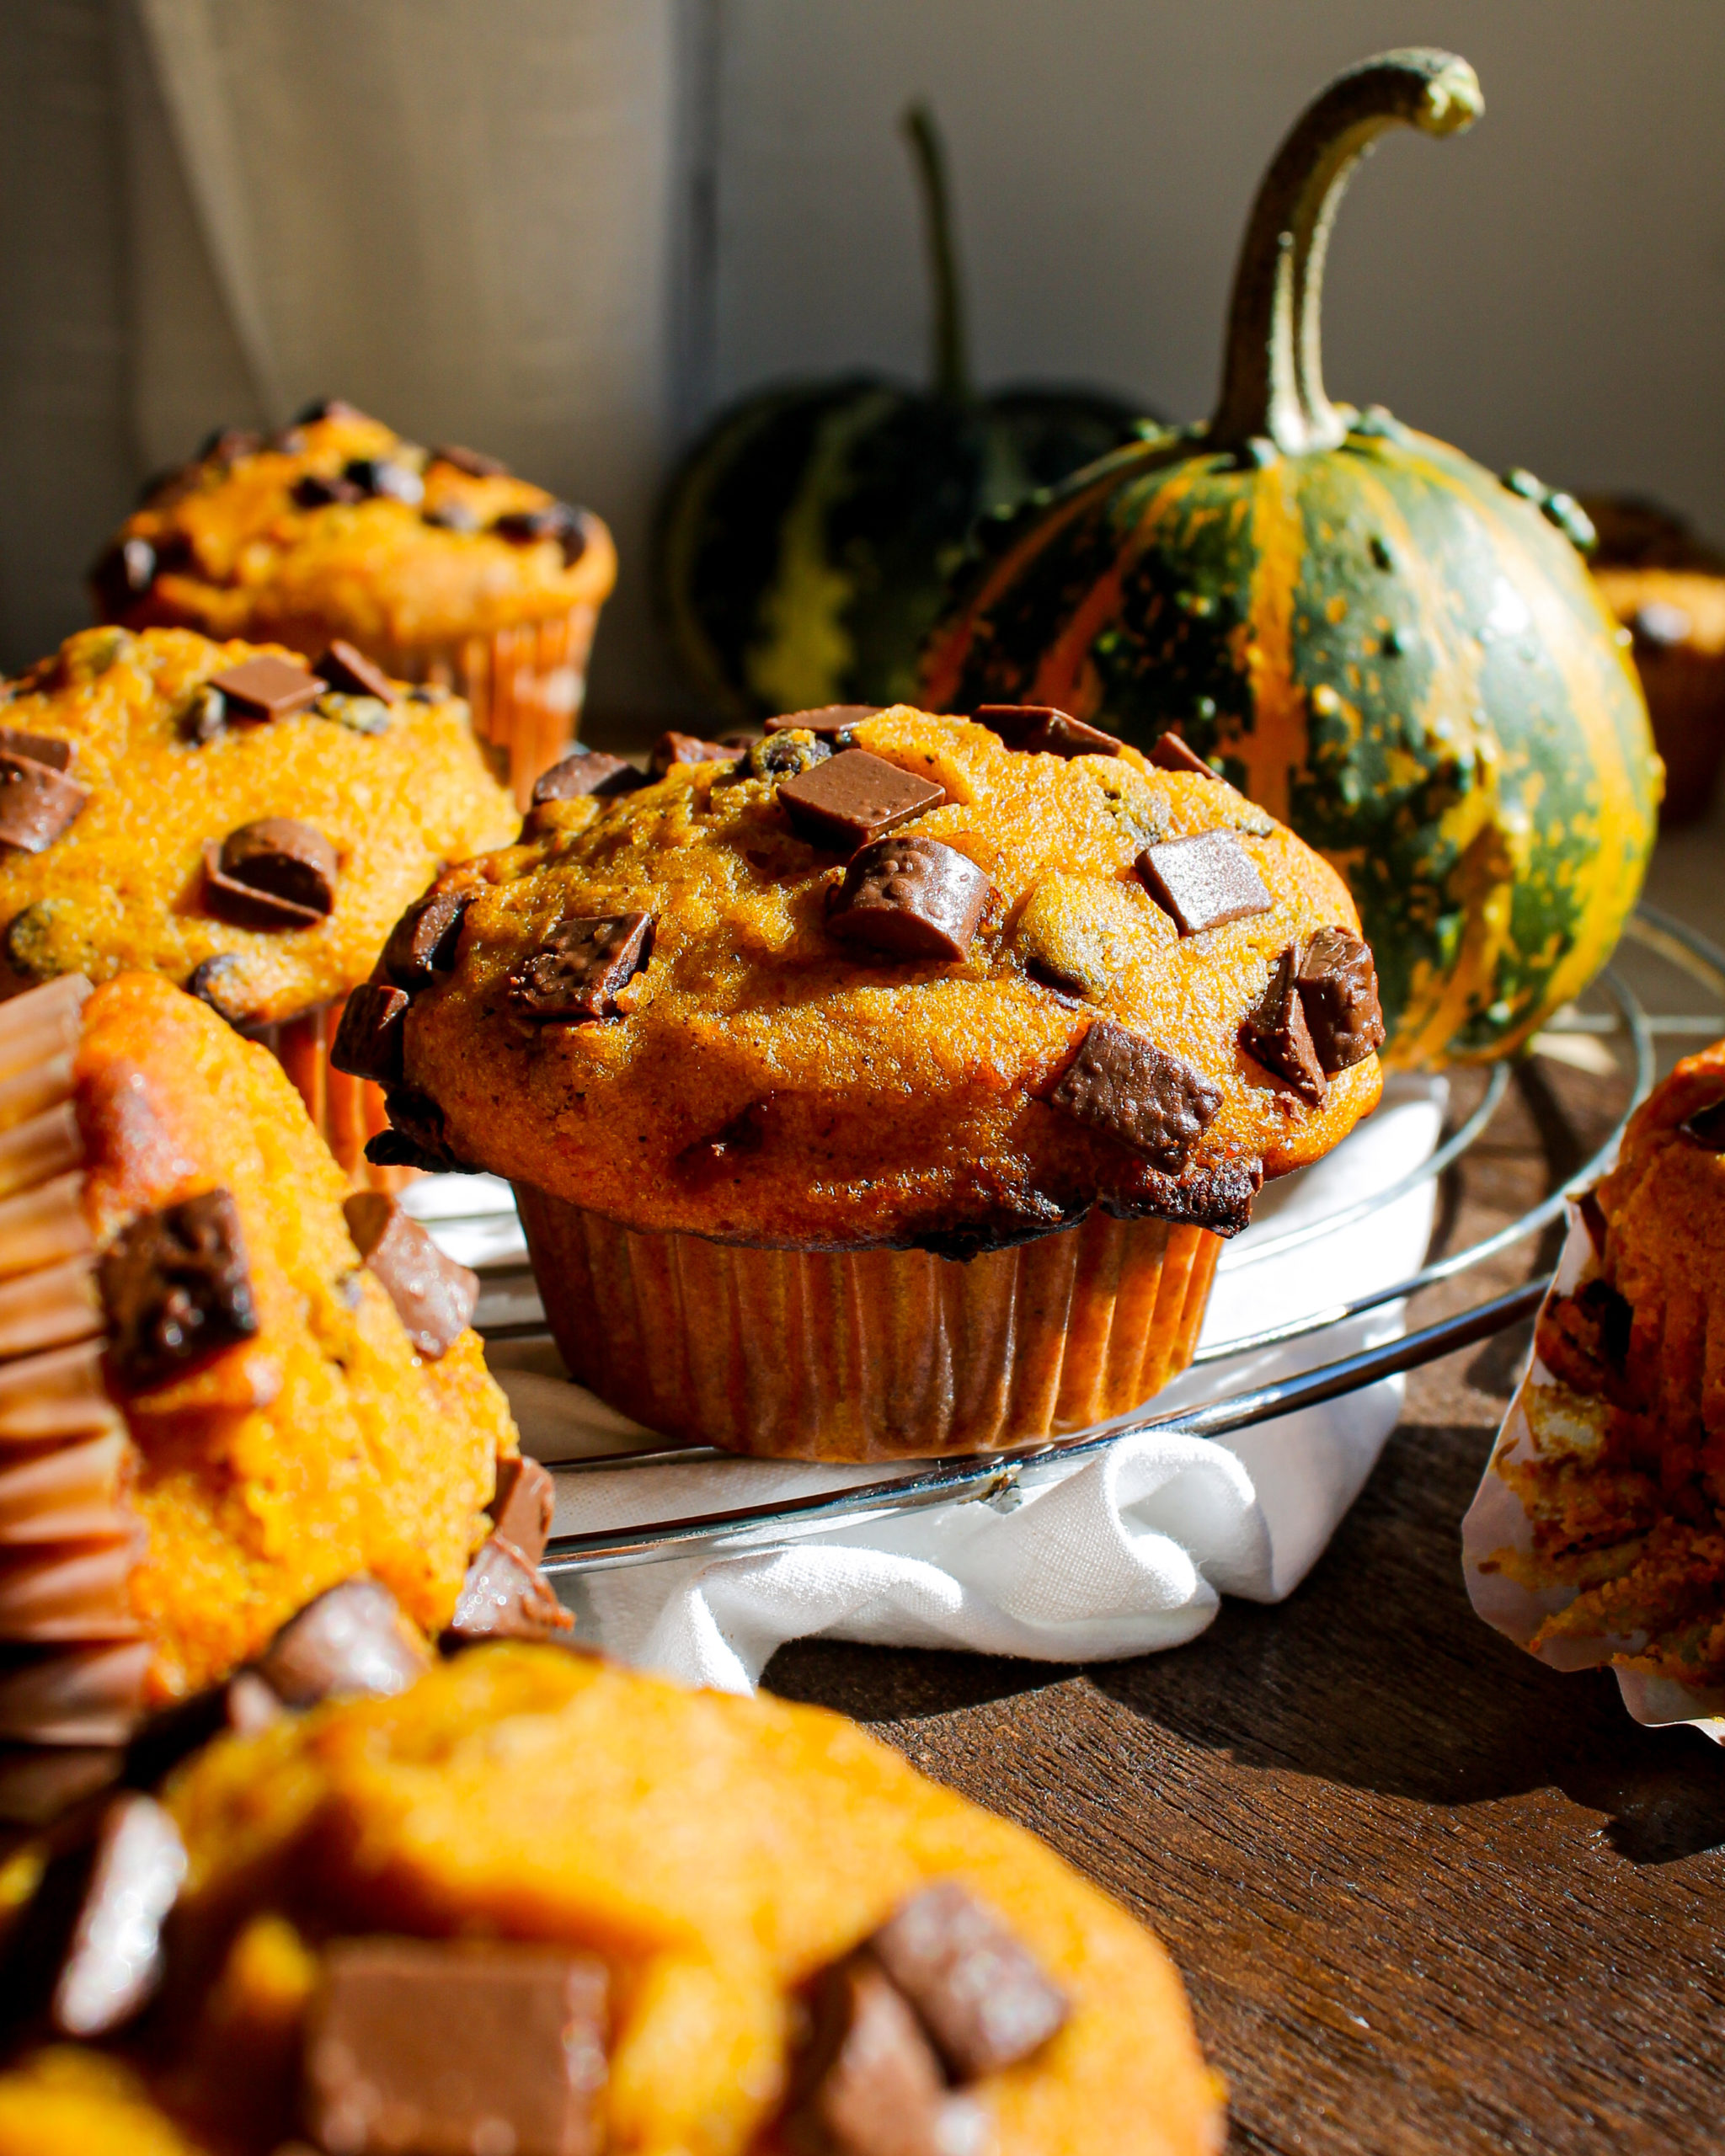 Pumpkin Spice Muffins With Chocolate
